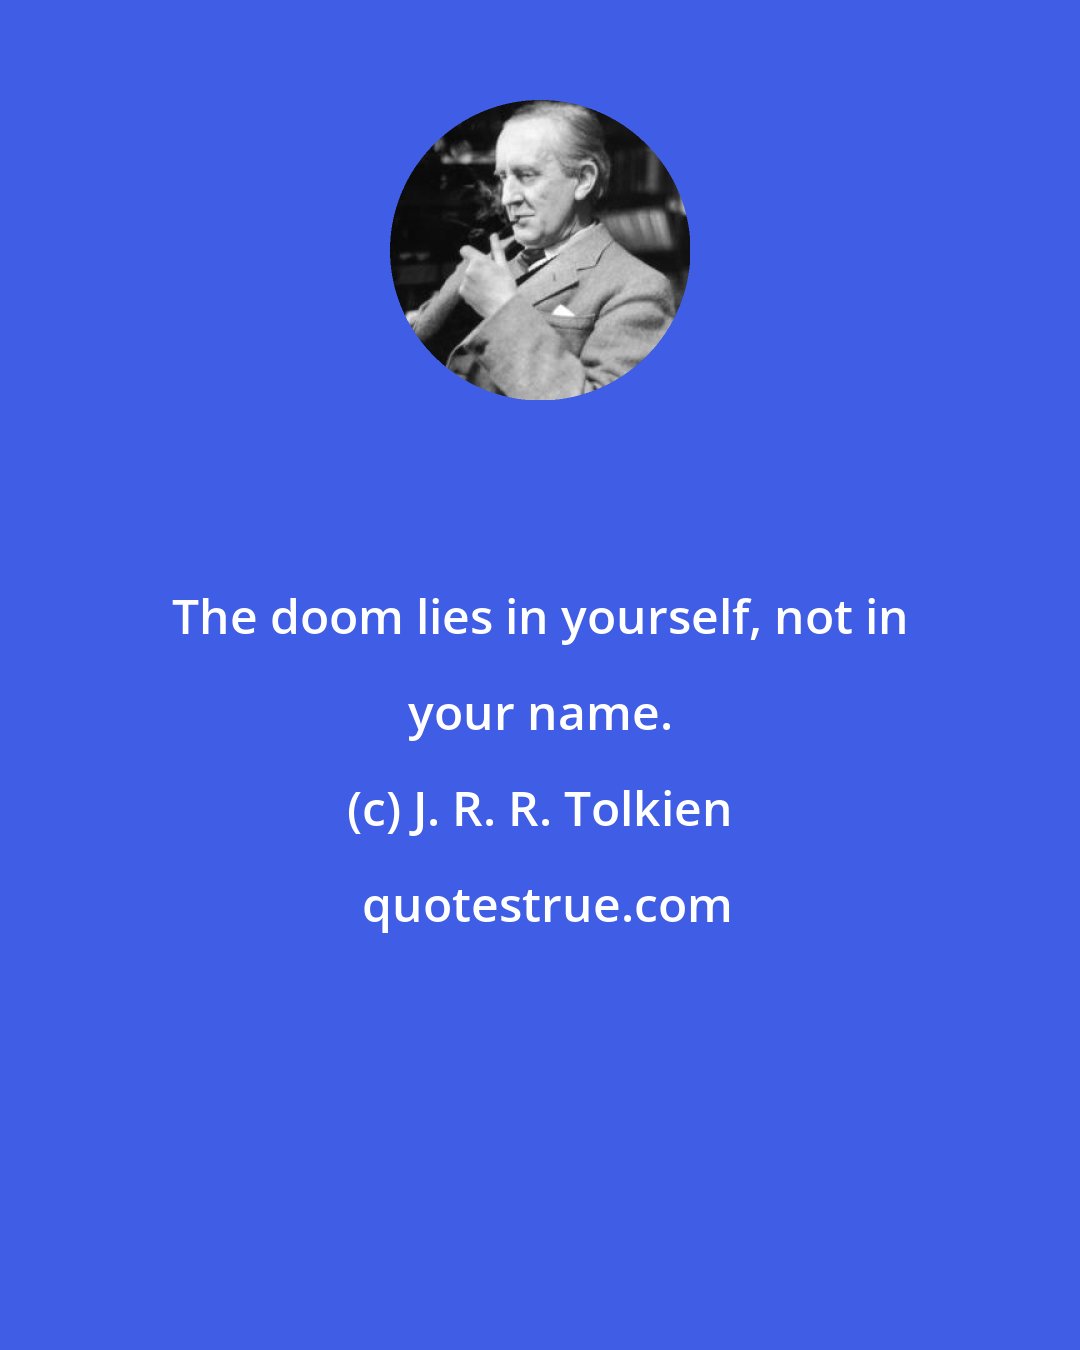 J. R. R. Tolkien: The doom lies in yourself, not in your name.